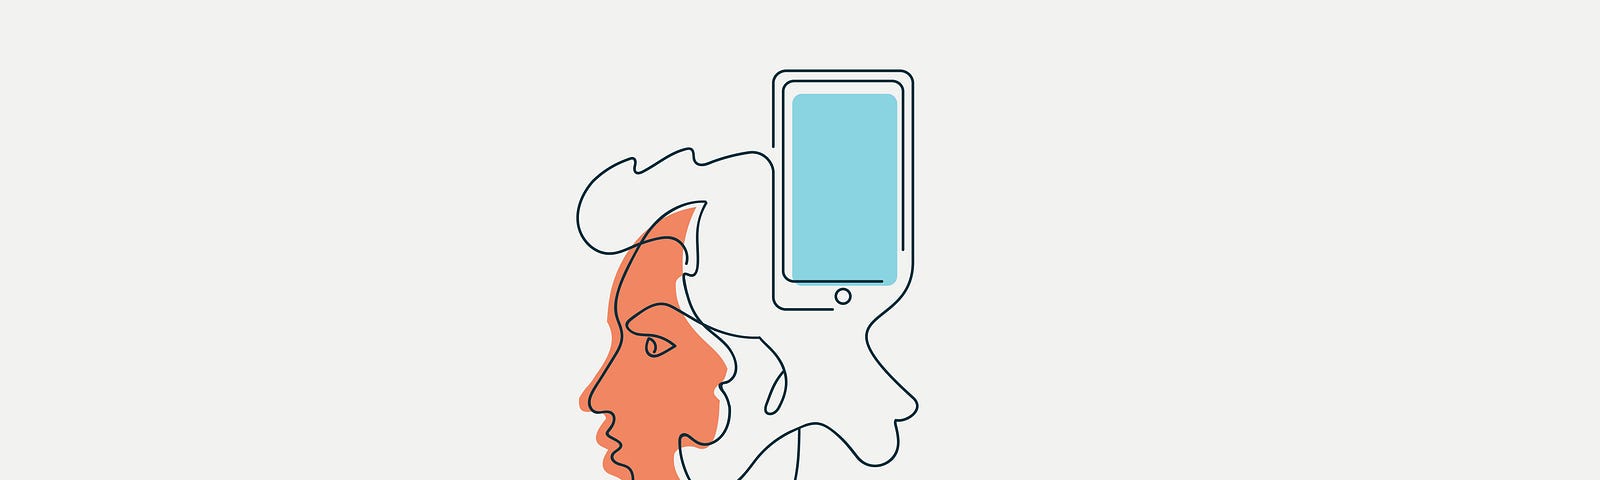 A simple, line drawing illustration of a human head and mobile phone as one.